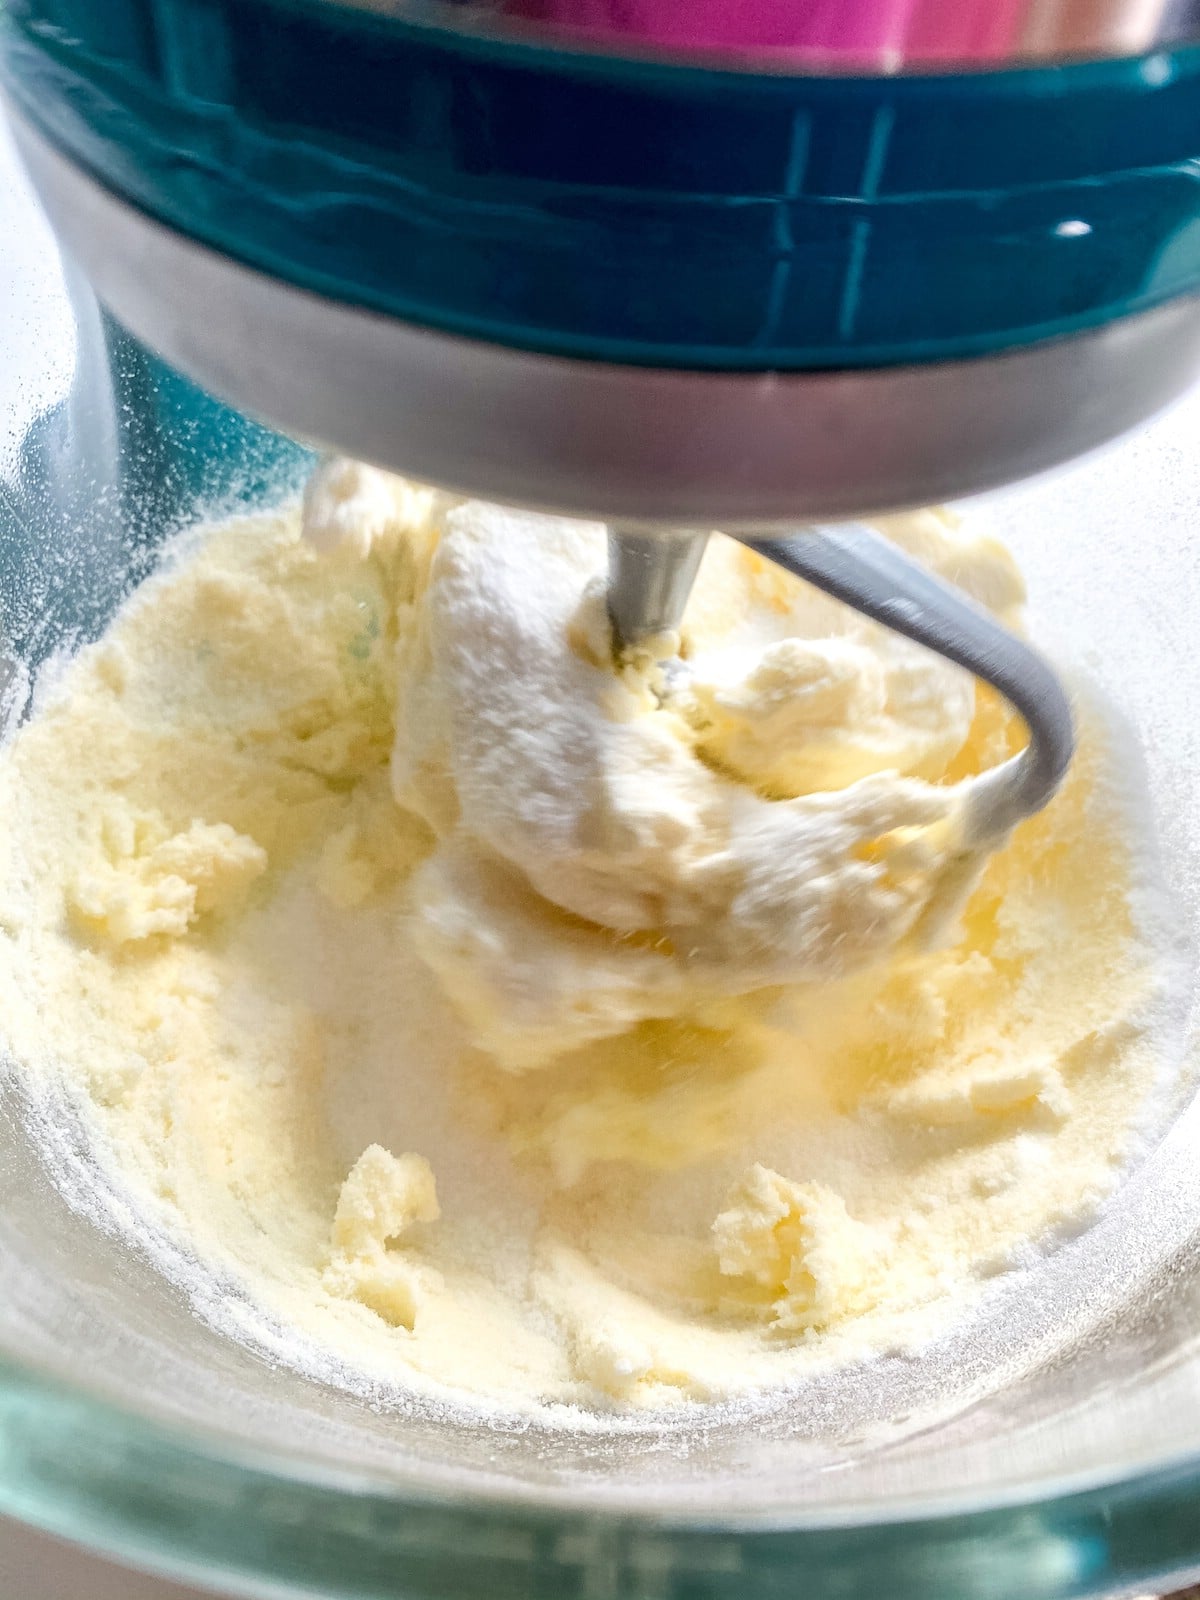 Creaming butter and sugar with stand mixer